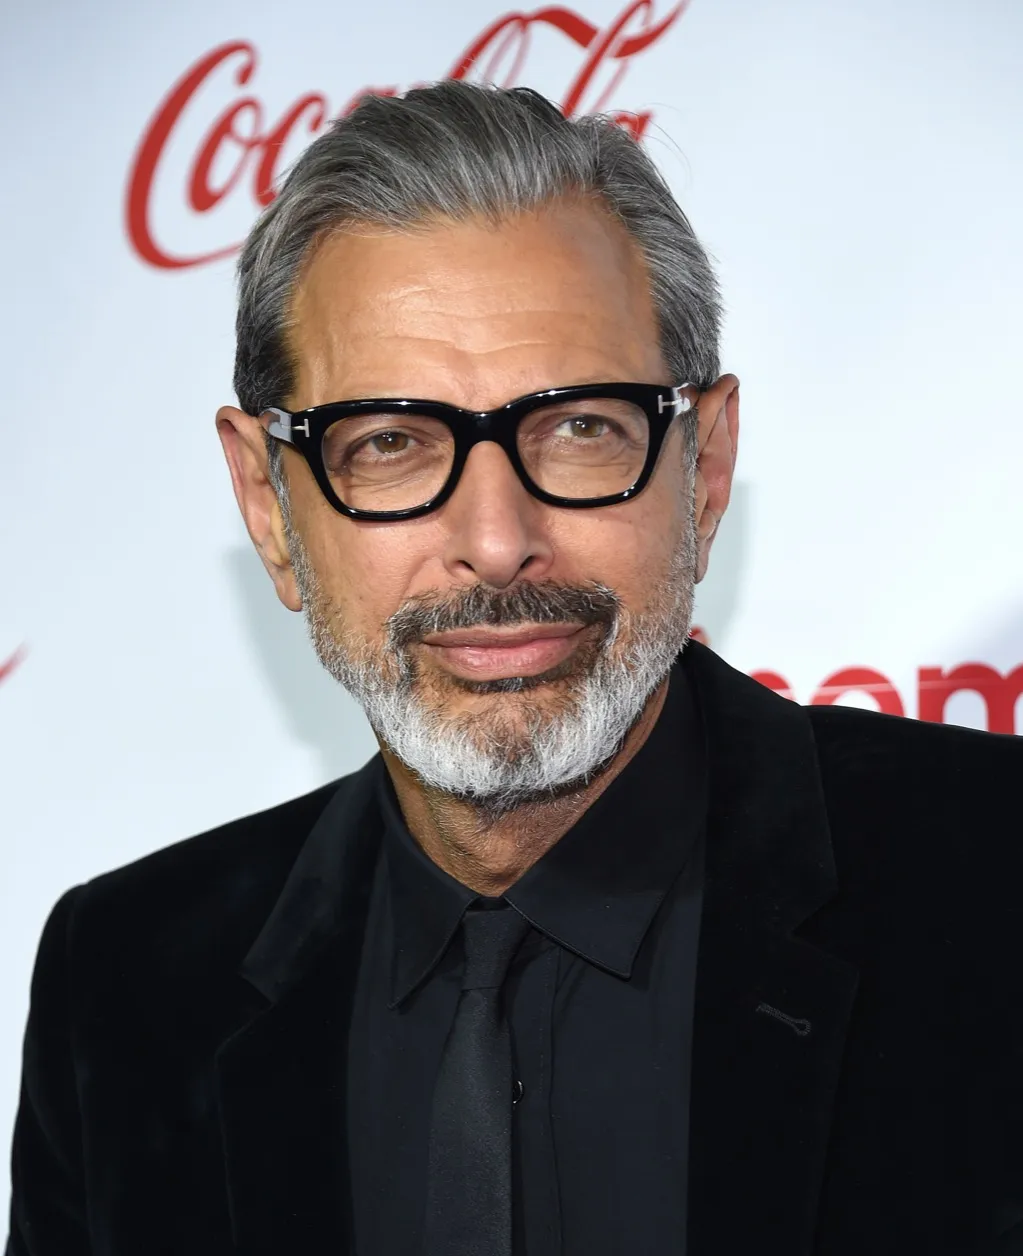 men's haircuts to look younger, starring Jeff Goldblum